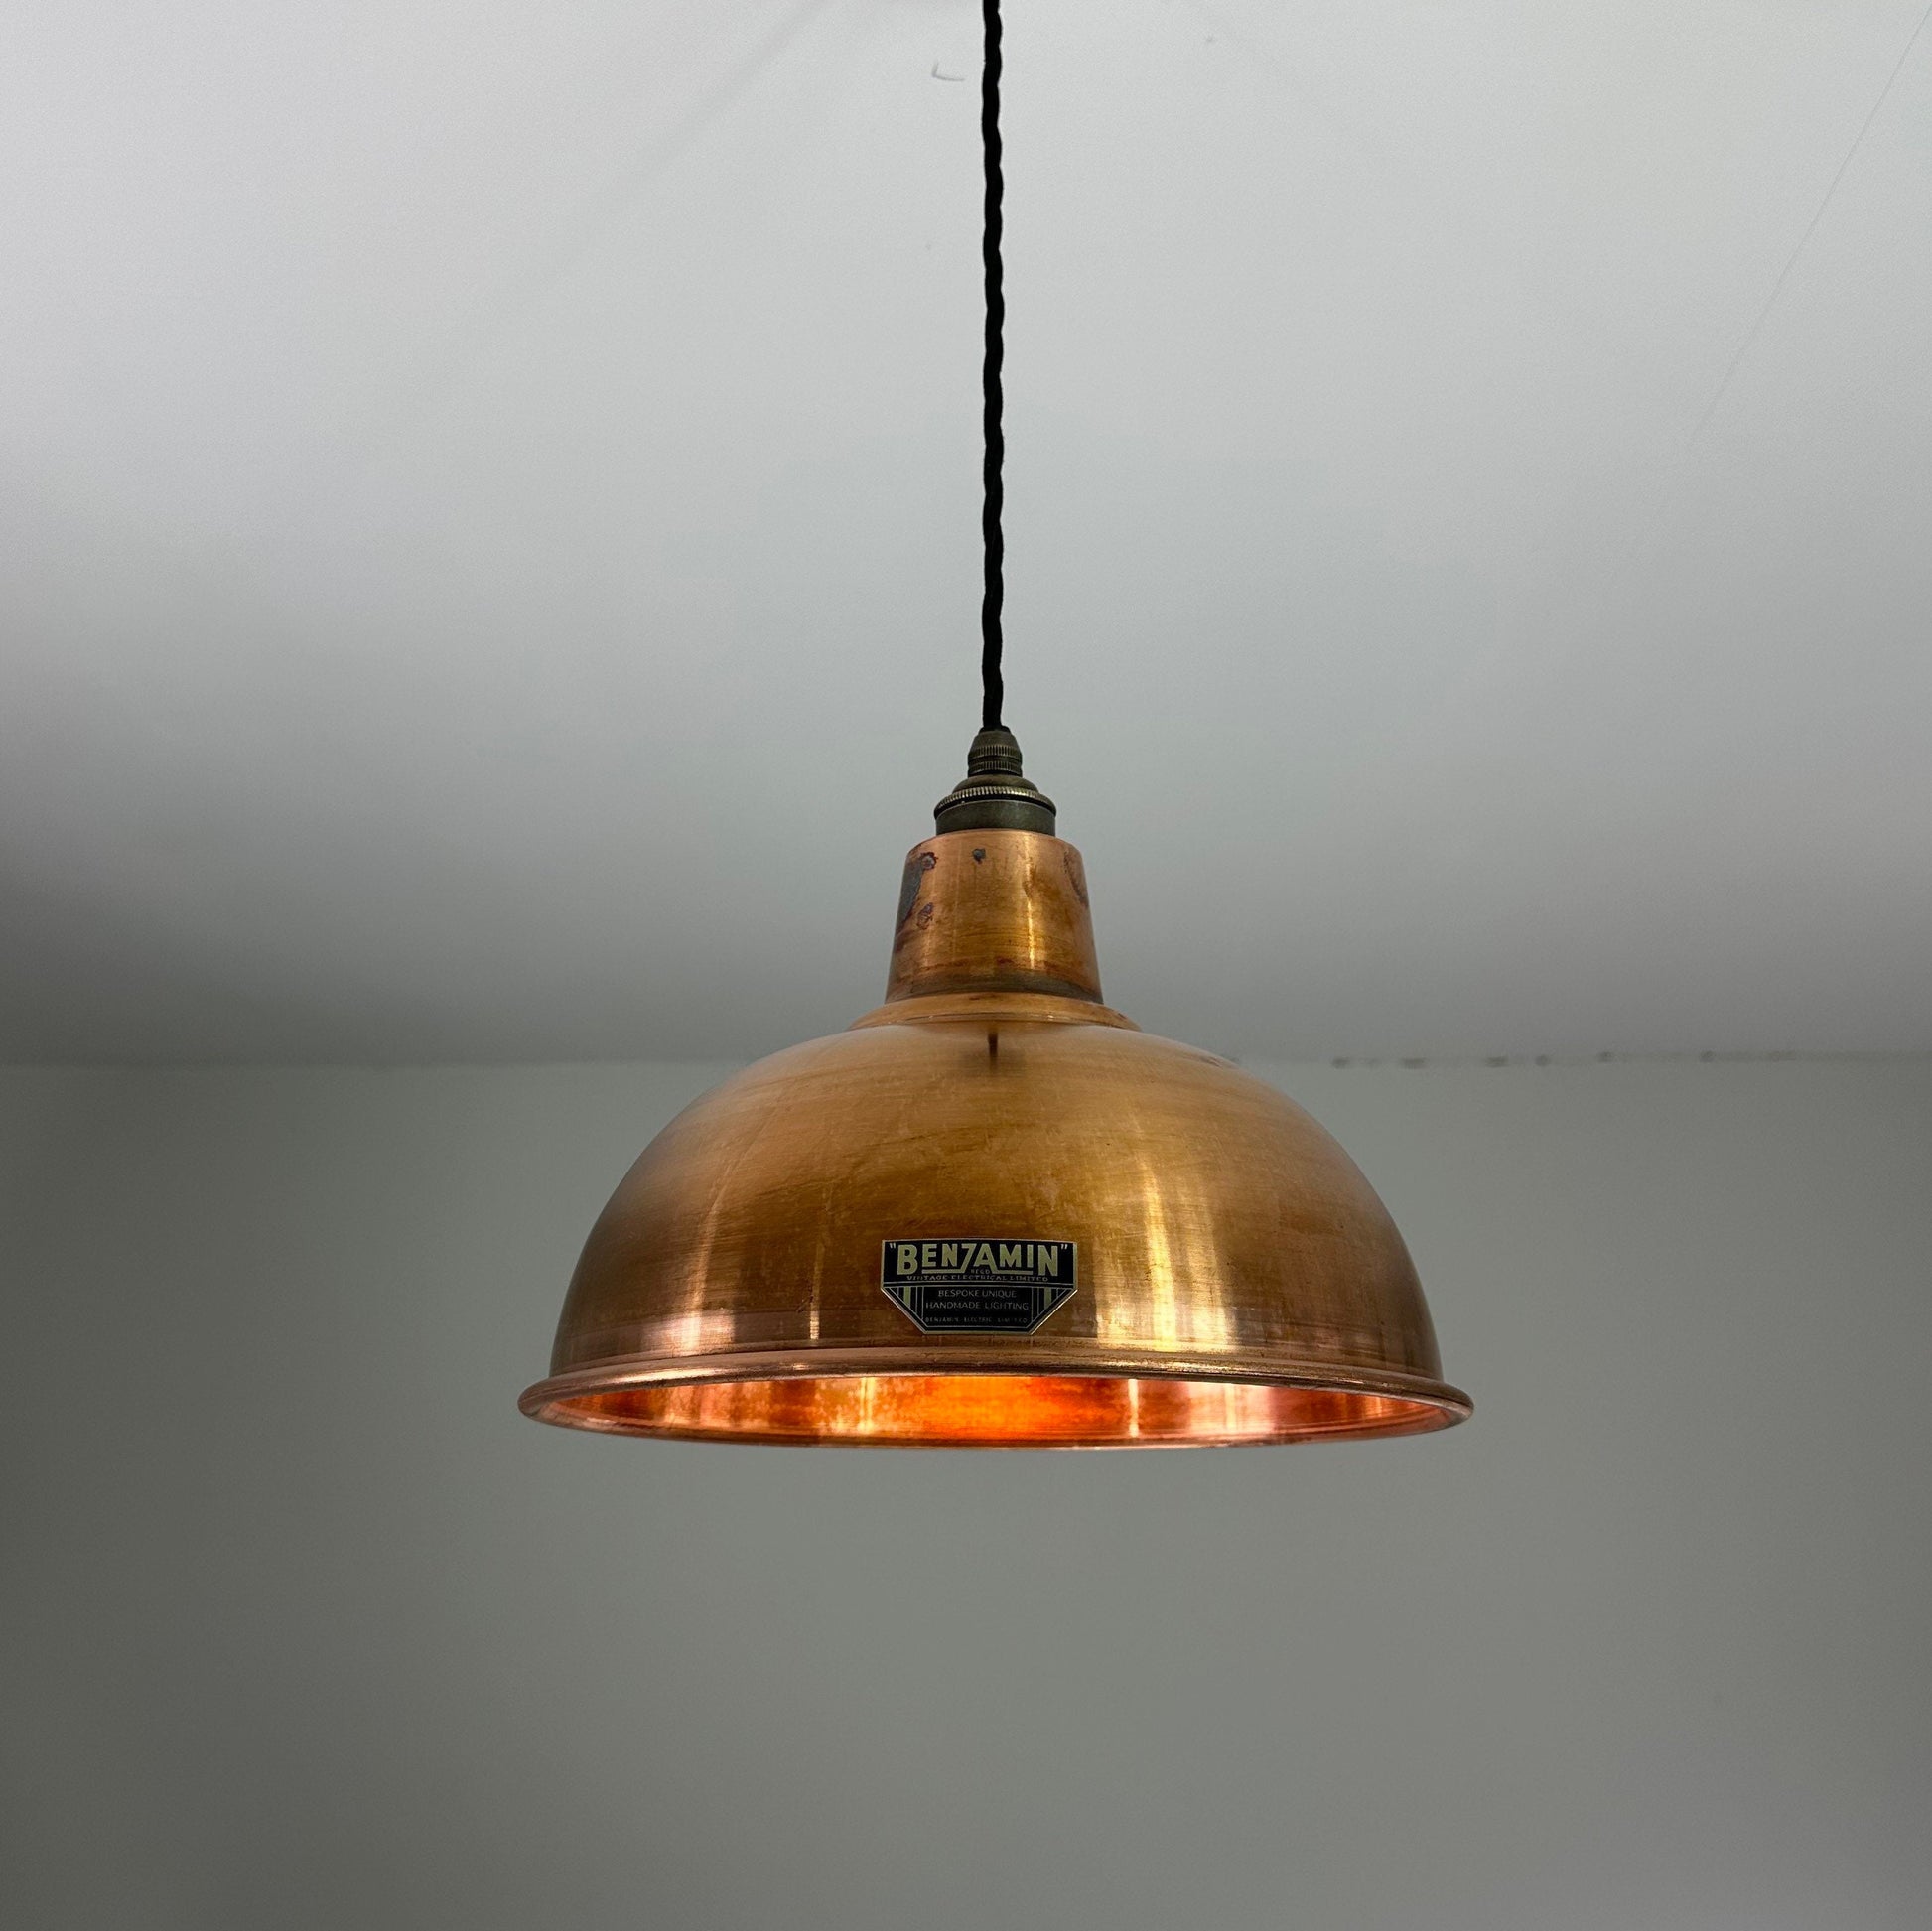 Salthouse ~ Solid Steel Industrial Shade Pendant Set Light | Ceiling Dining Room | Kitchen Table | Vintage Edison Filament Bulb | 10 Inch